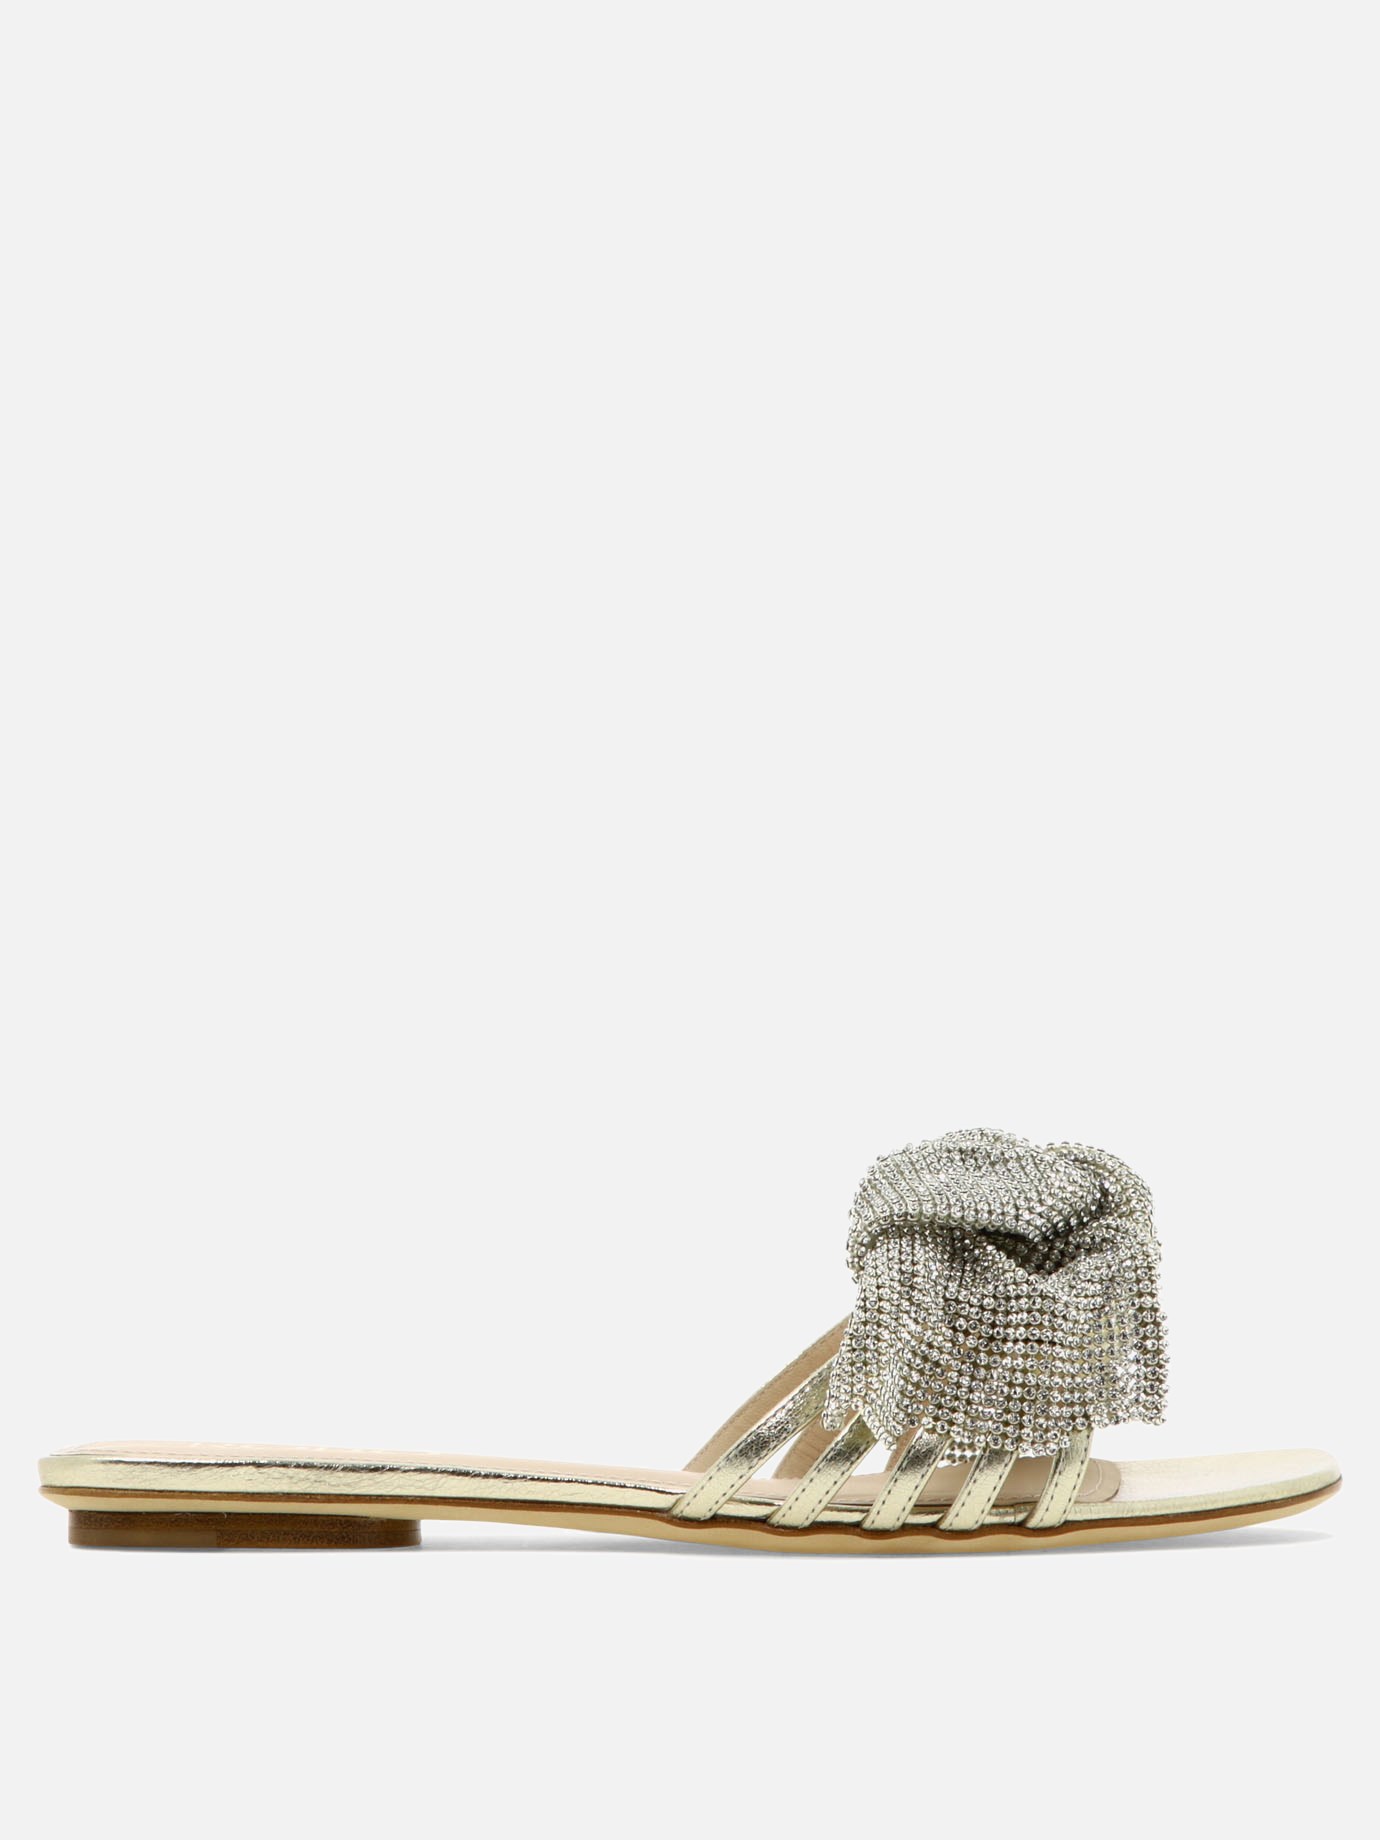  Ribbon  sandals by Rodo